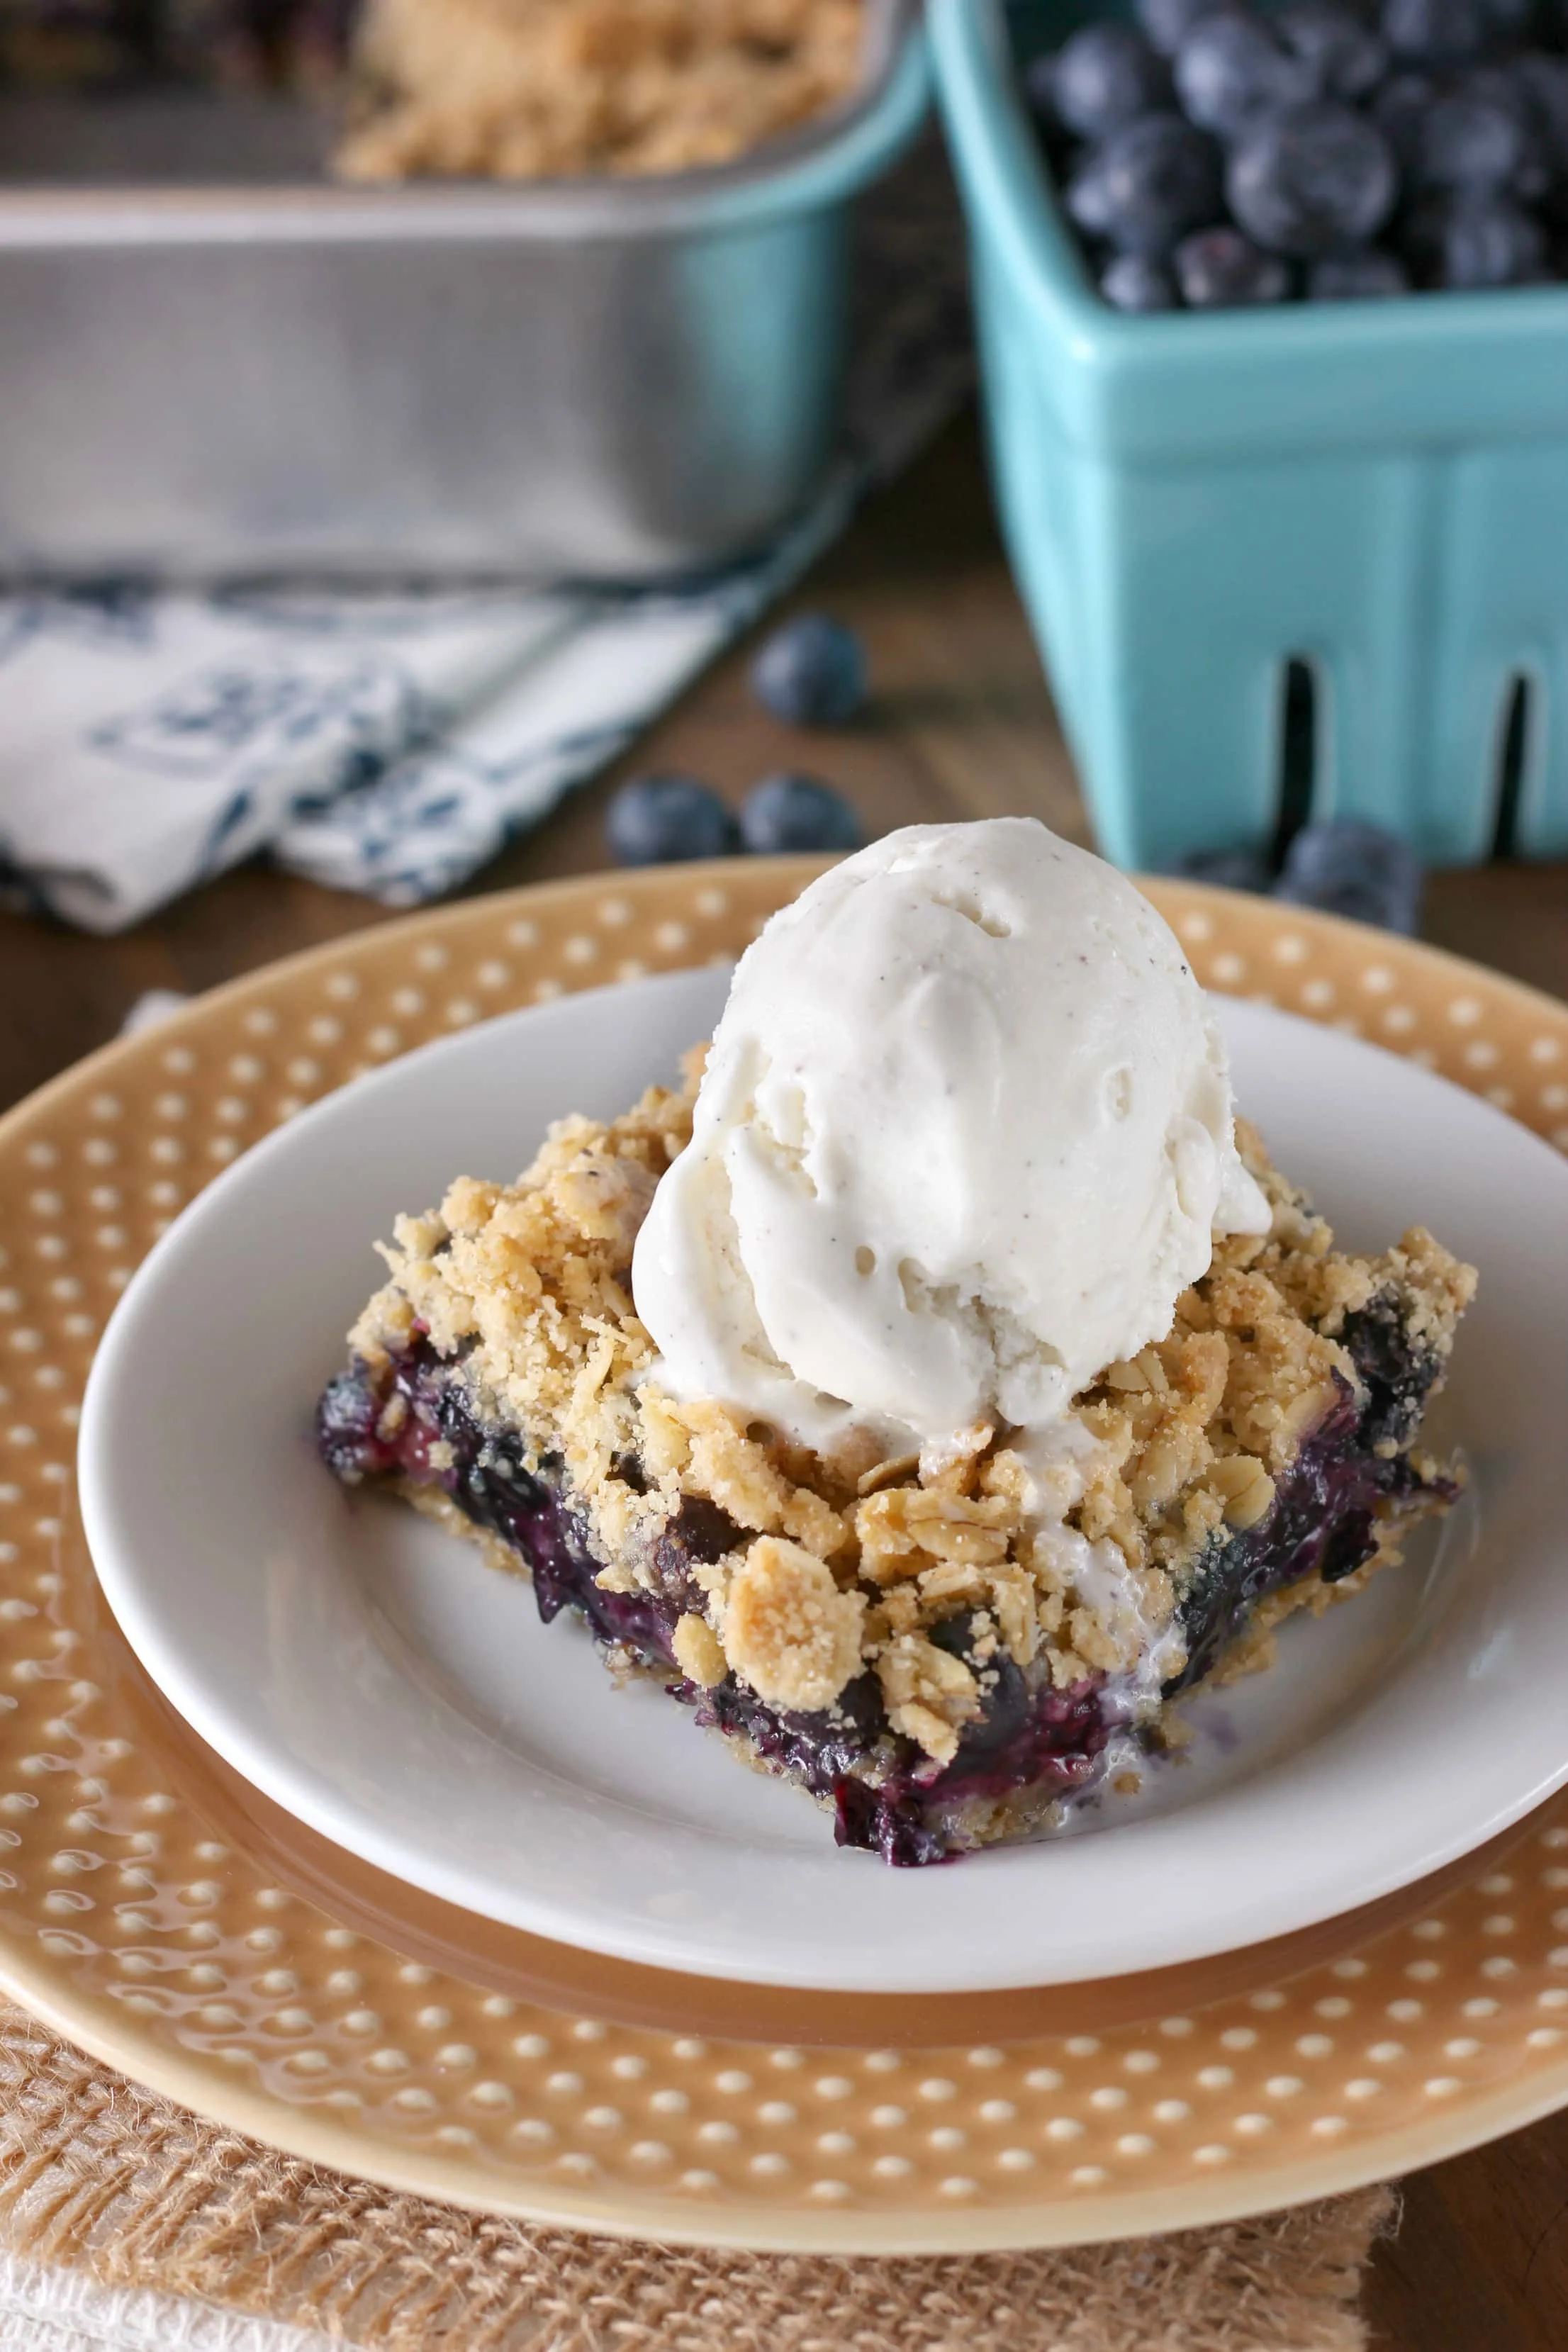 Blueberry Crisp Bars are an easy crumble bar recipe from A Kitchen Addiction